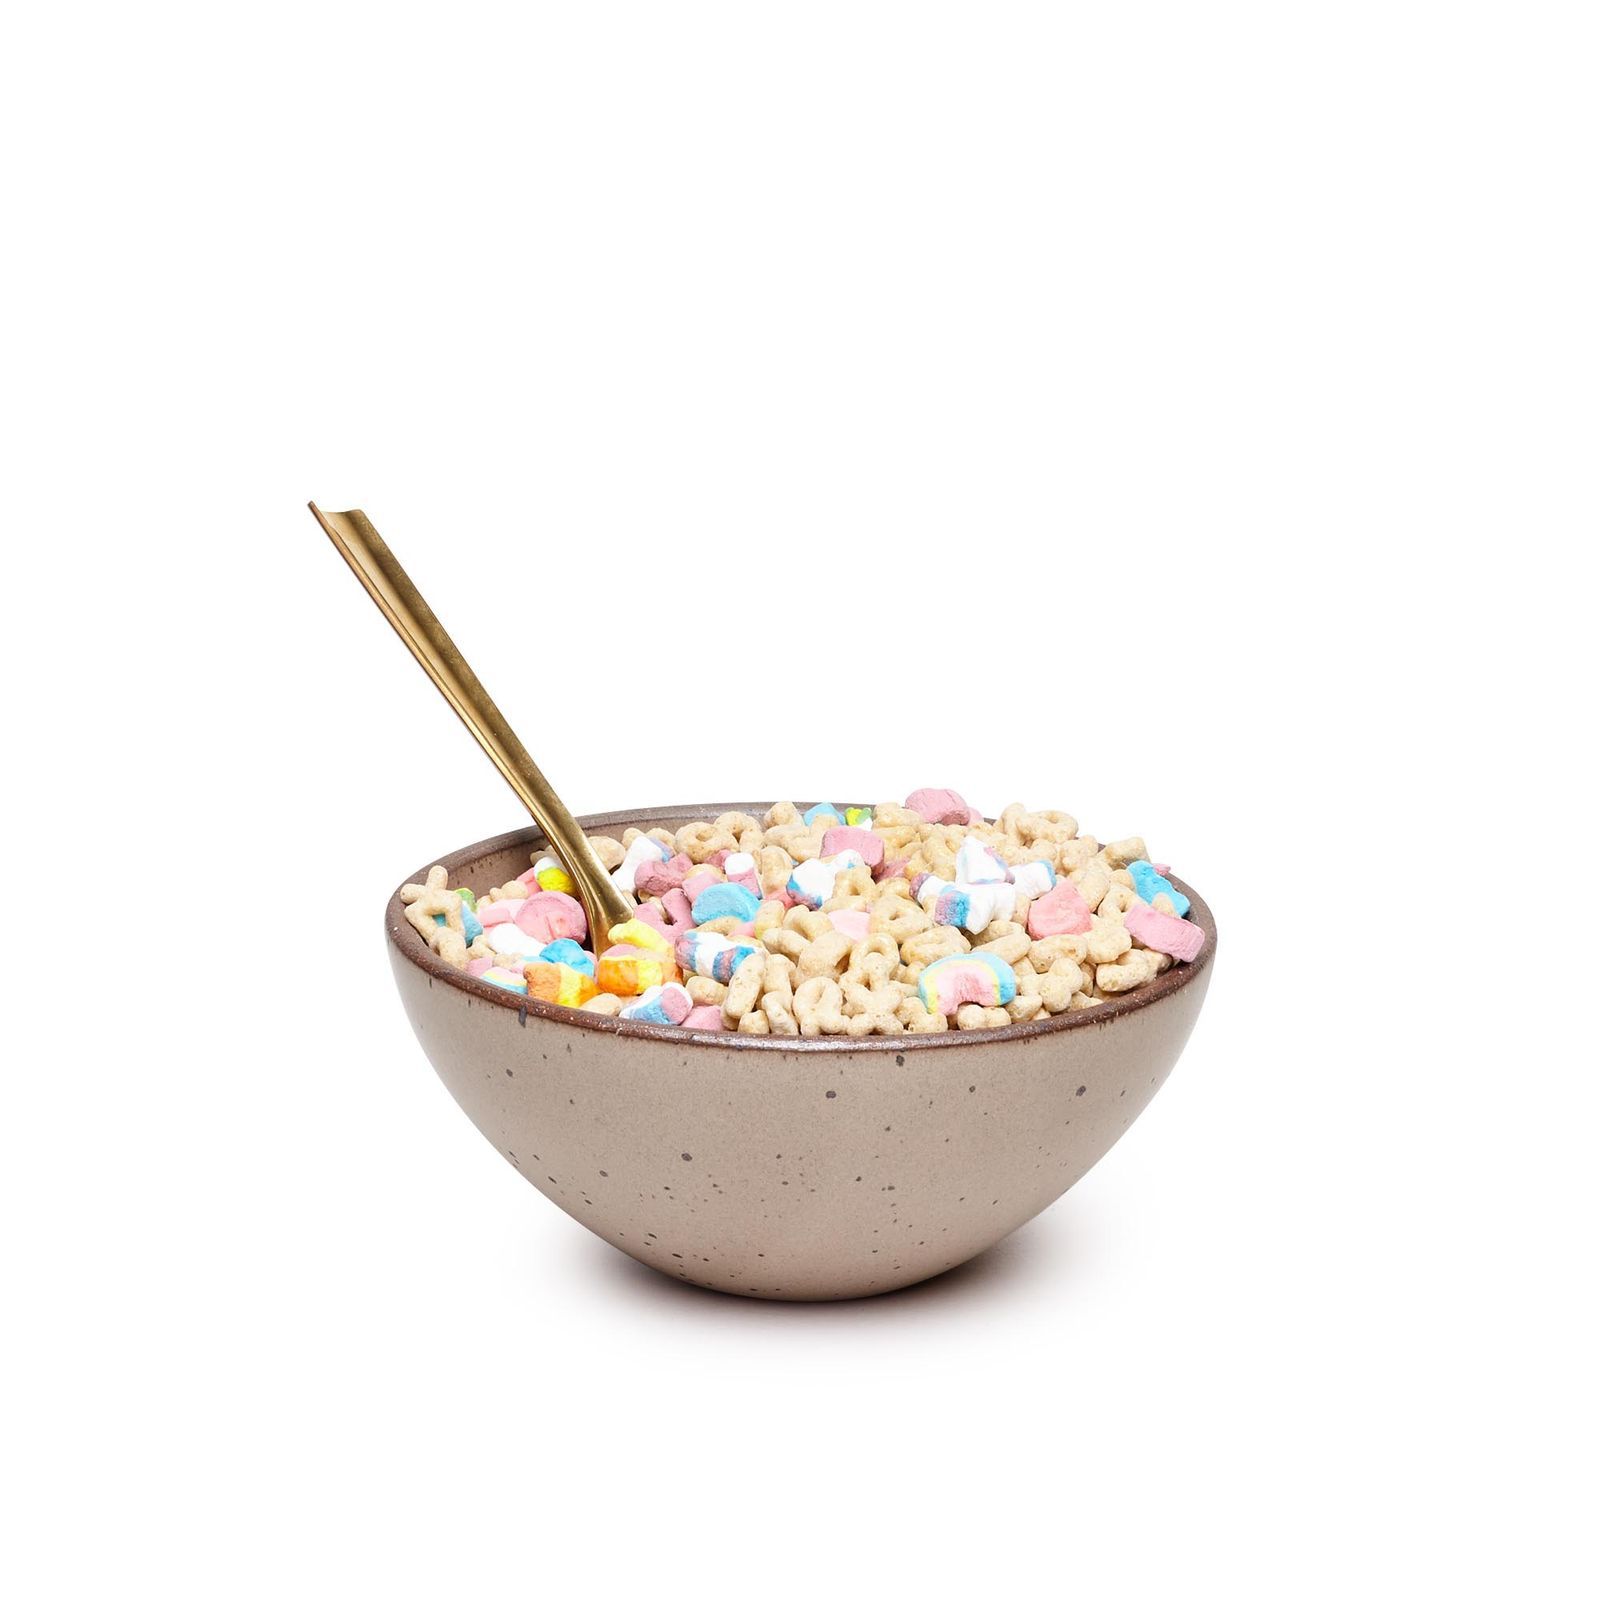 An earthy brown colored bowl filled with an adult serving of Lucky Charms cereal. About to be eaten with a brass spoon.